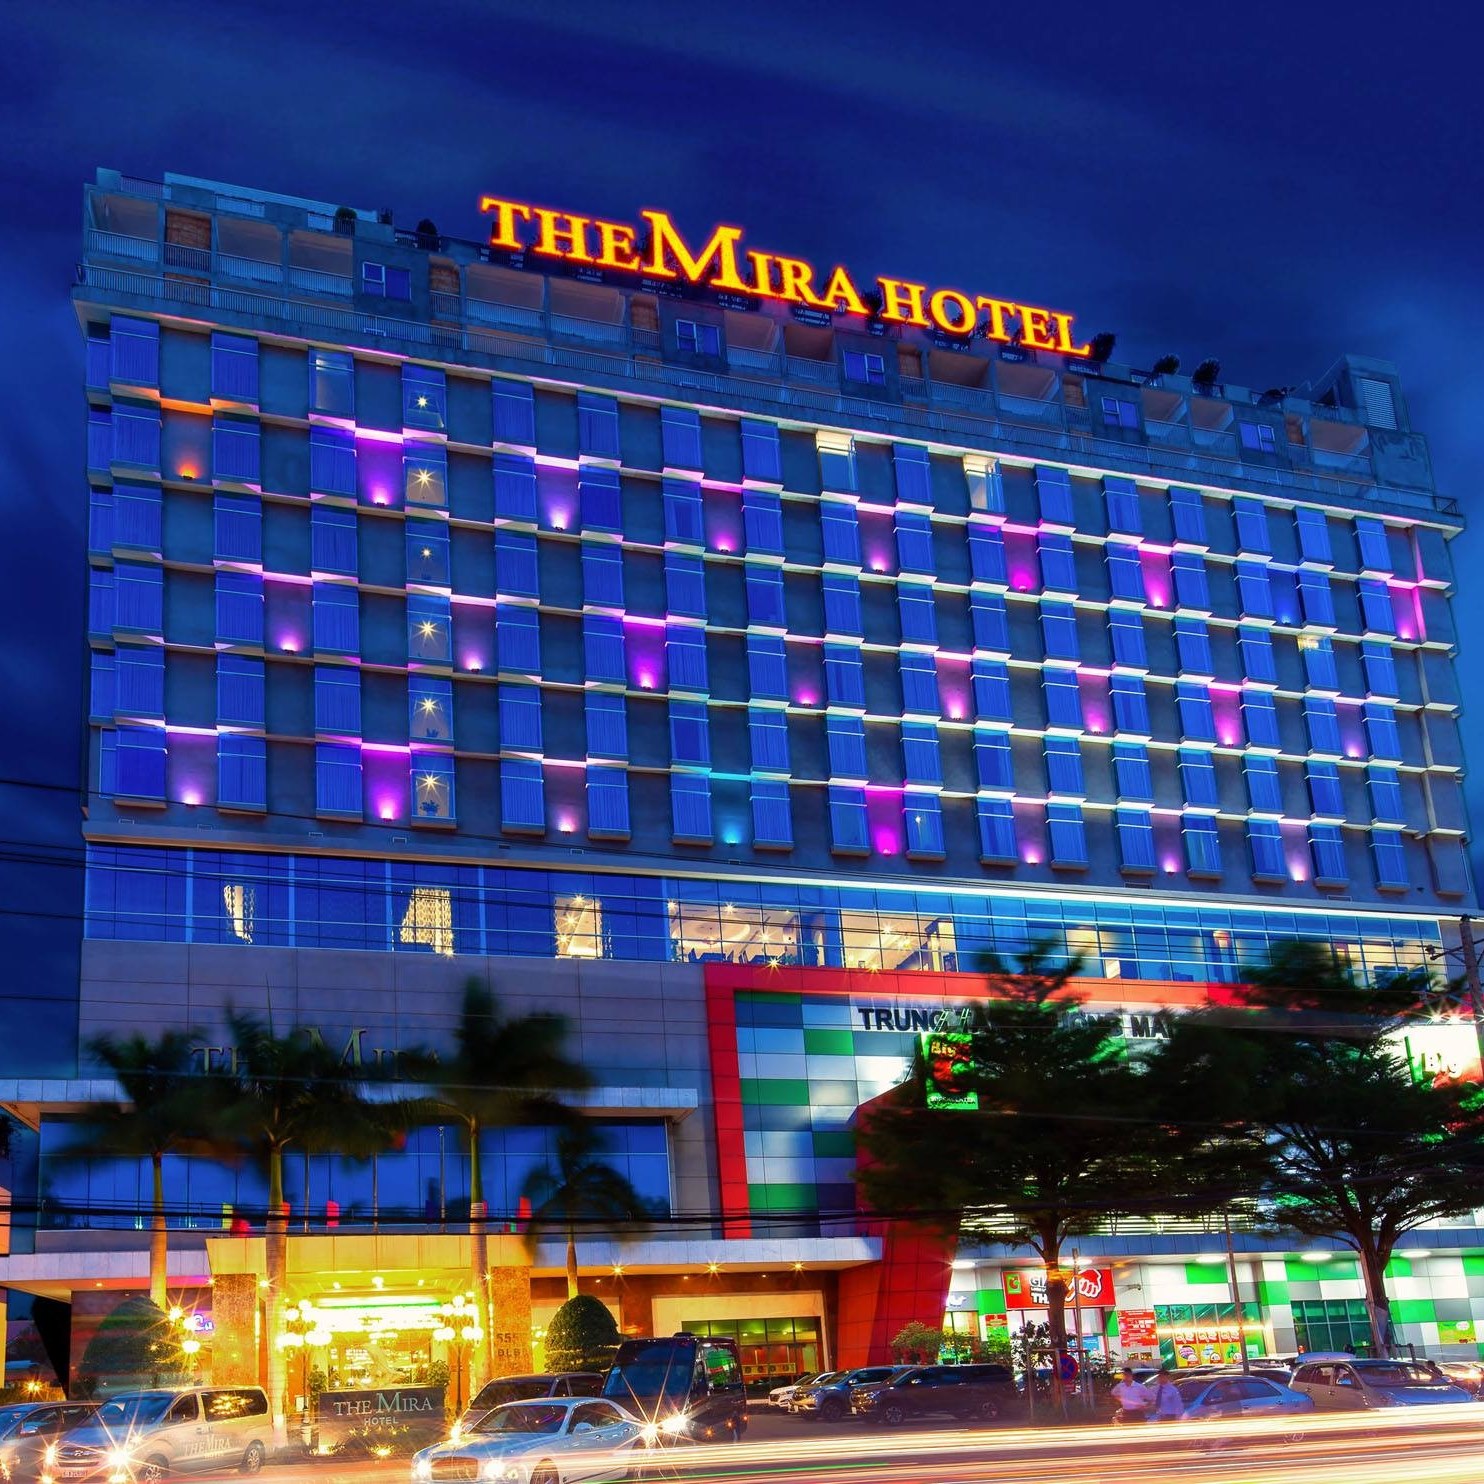 The Mira Hotel and Convention Center